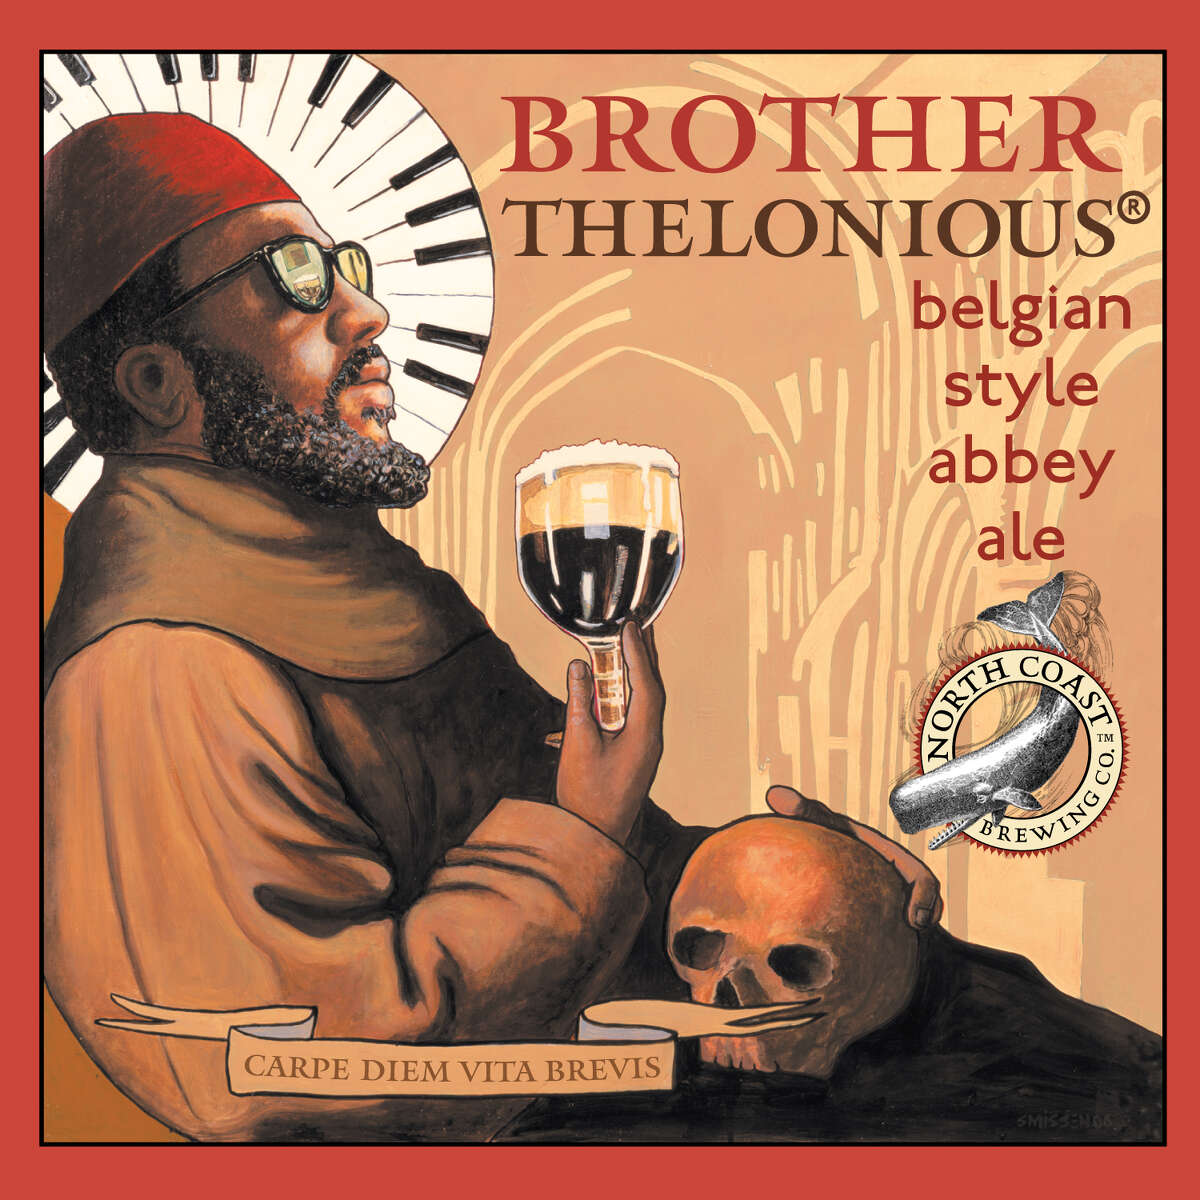 North Coast Brewing Co. Brother Thelonious Belgian-style abbey ale